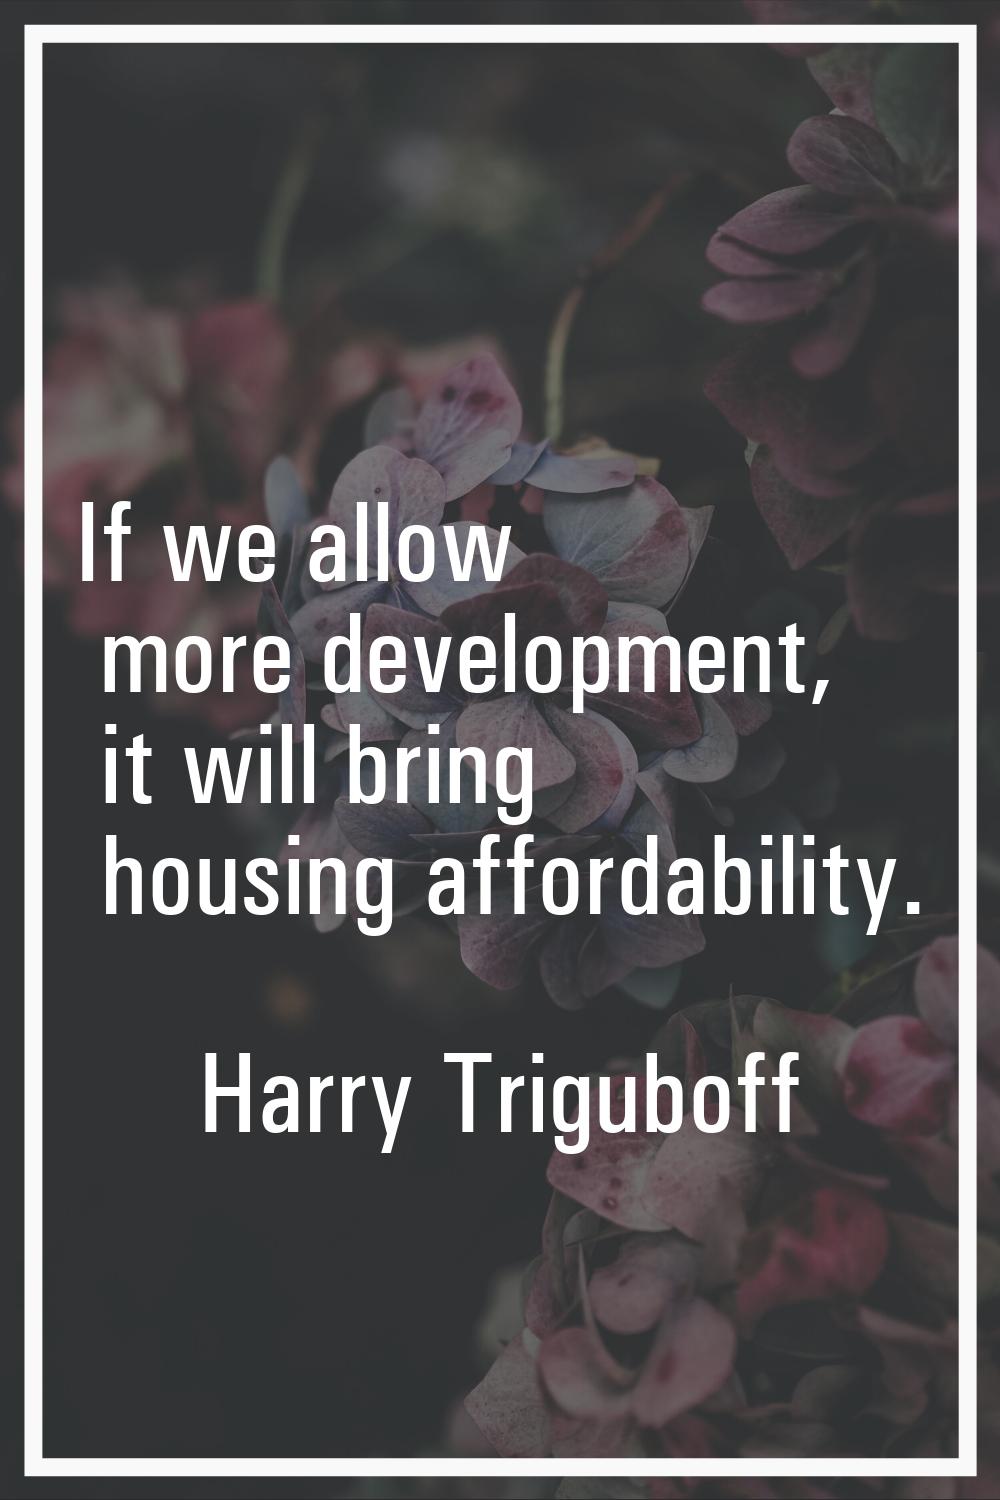 If we allow more development, it will bring housing affordability.